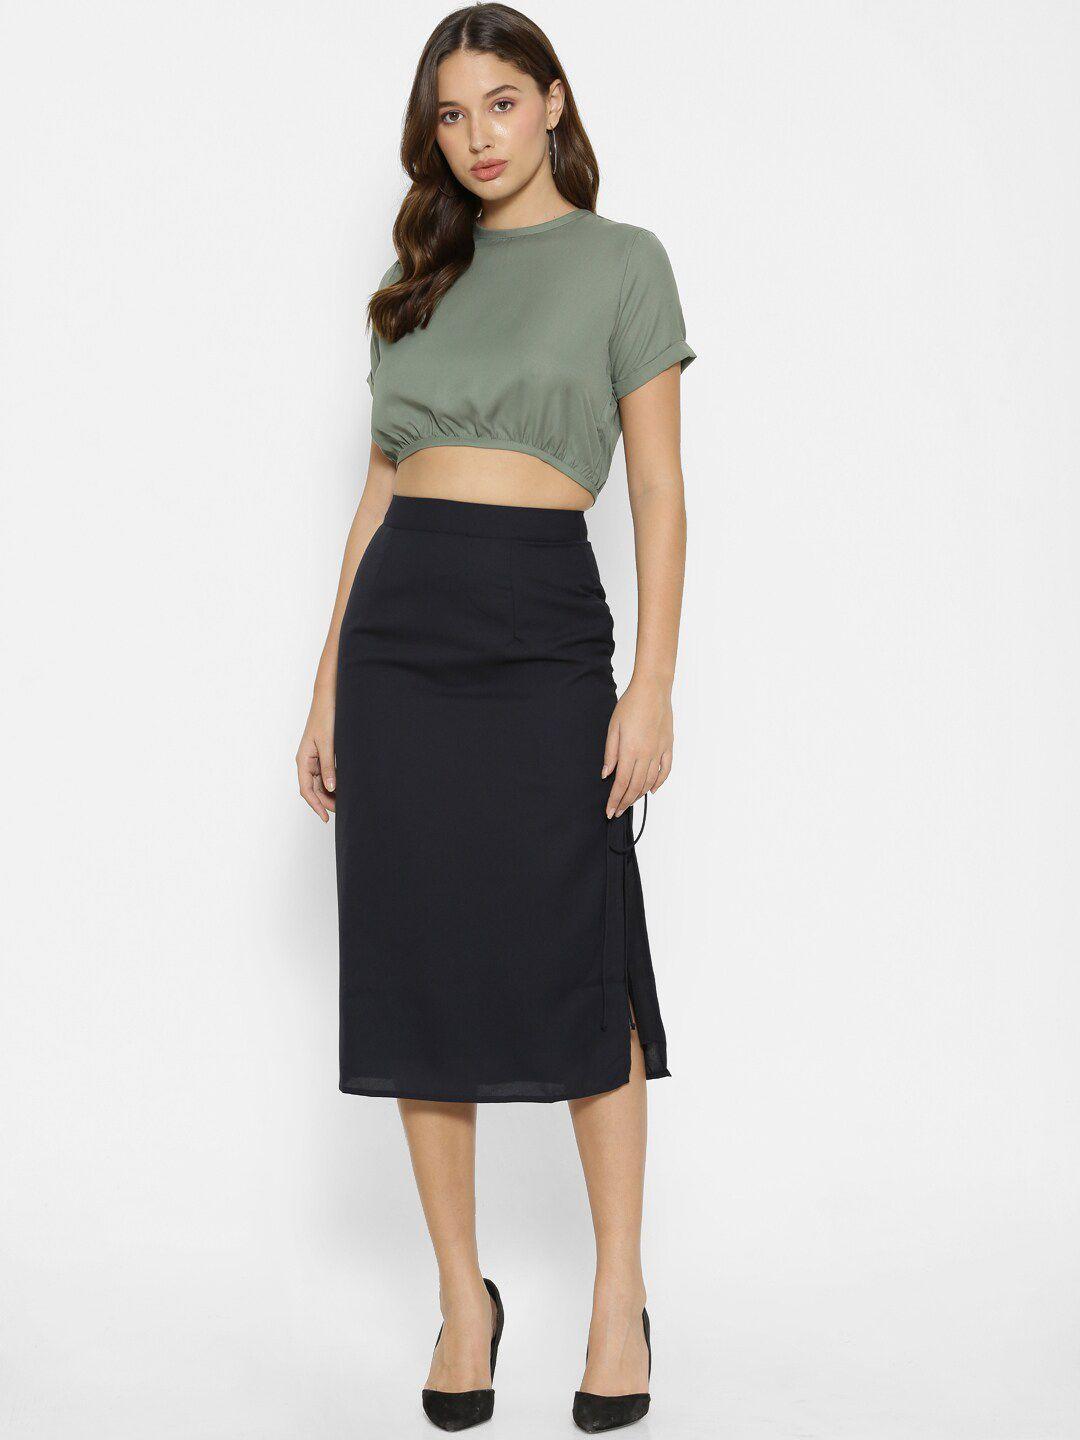 forever-21-women-khaki-&-black-crop-top-with-skirt